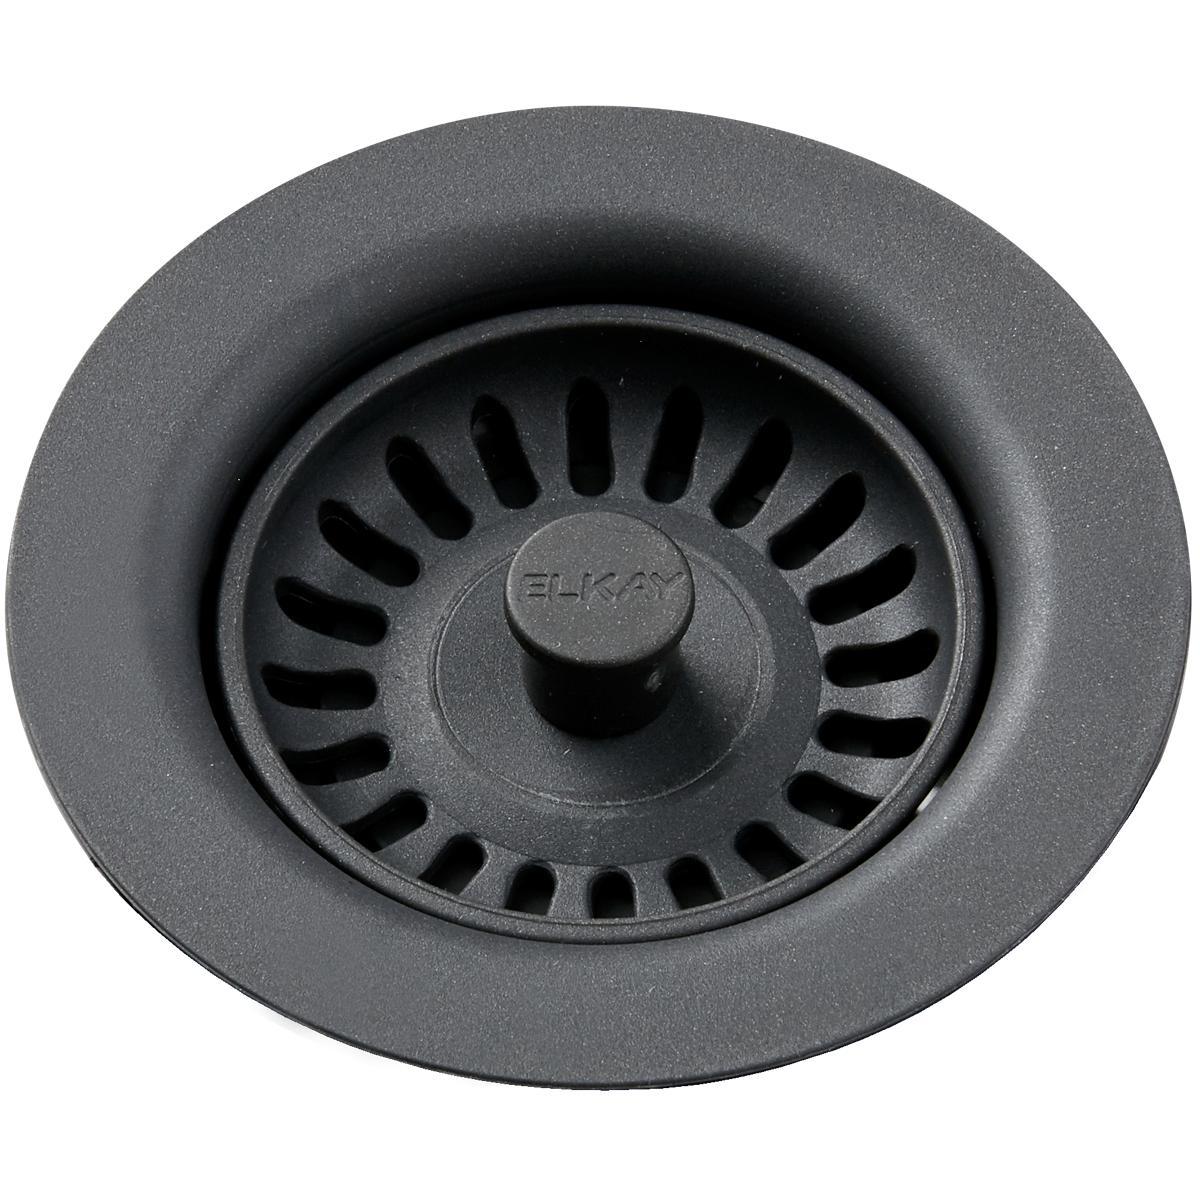 Elkay Polymer Drain Fitting with Removable Basket Strainer and Rubber Stopper-DirectSinks